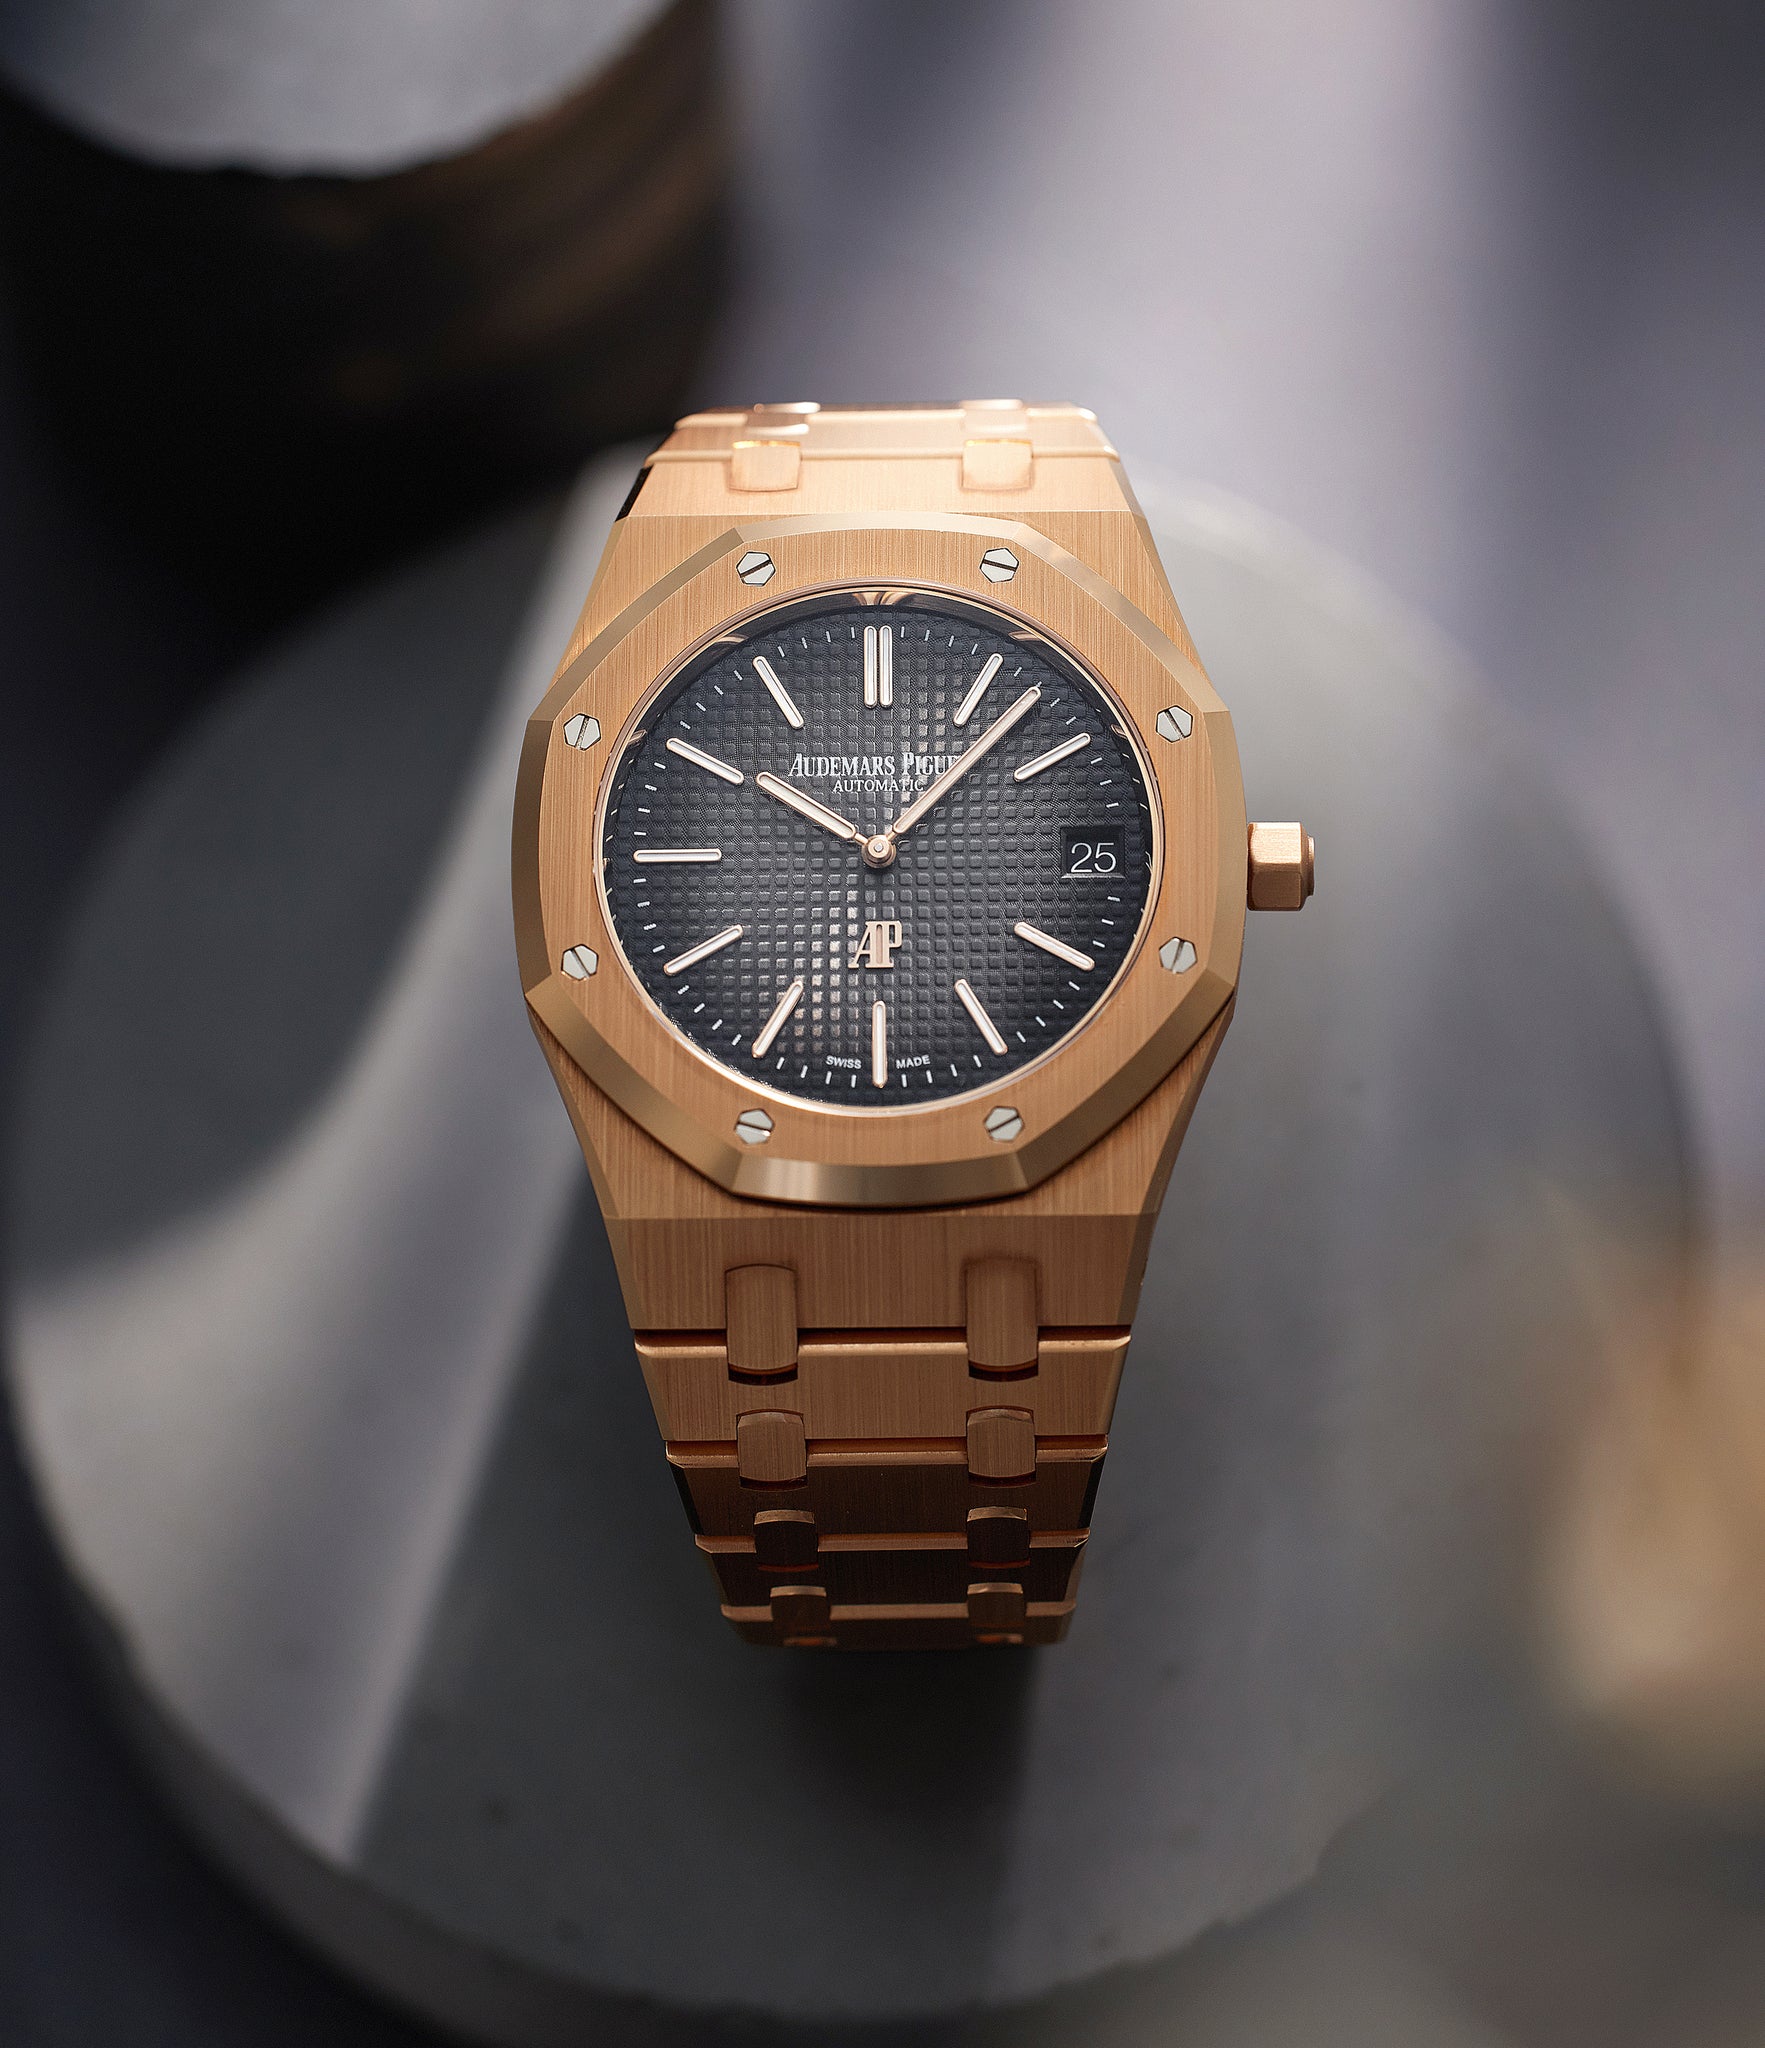 Royal Oak Jumbo 16202OR Audemars Piguet Rose Gold preowned watch at A Collected Man London